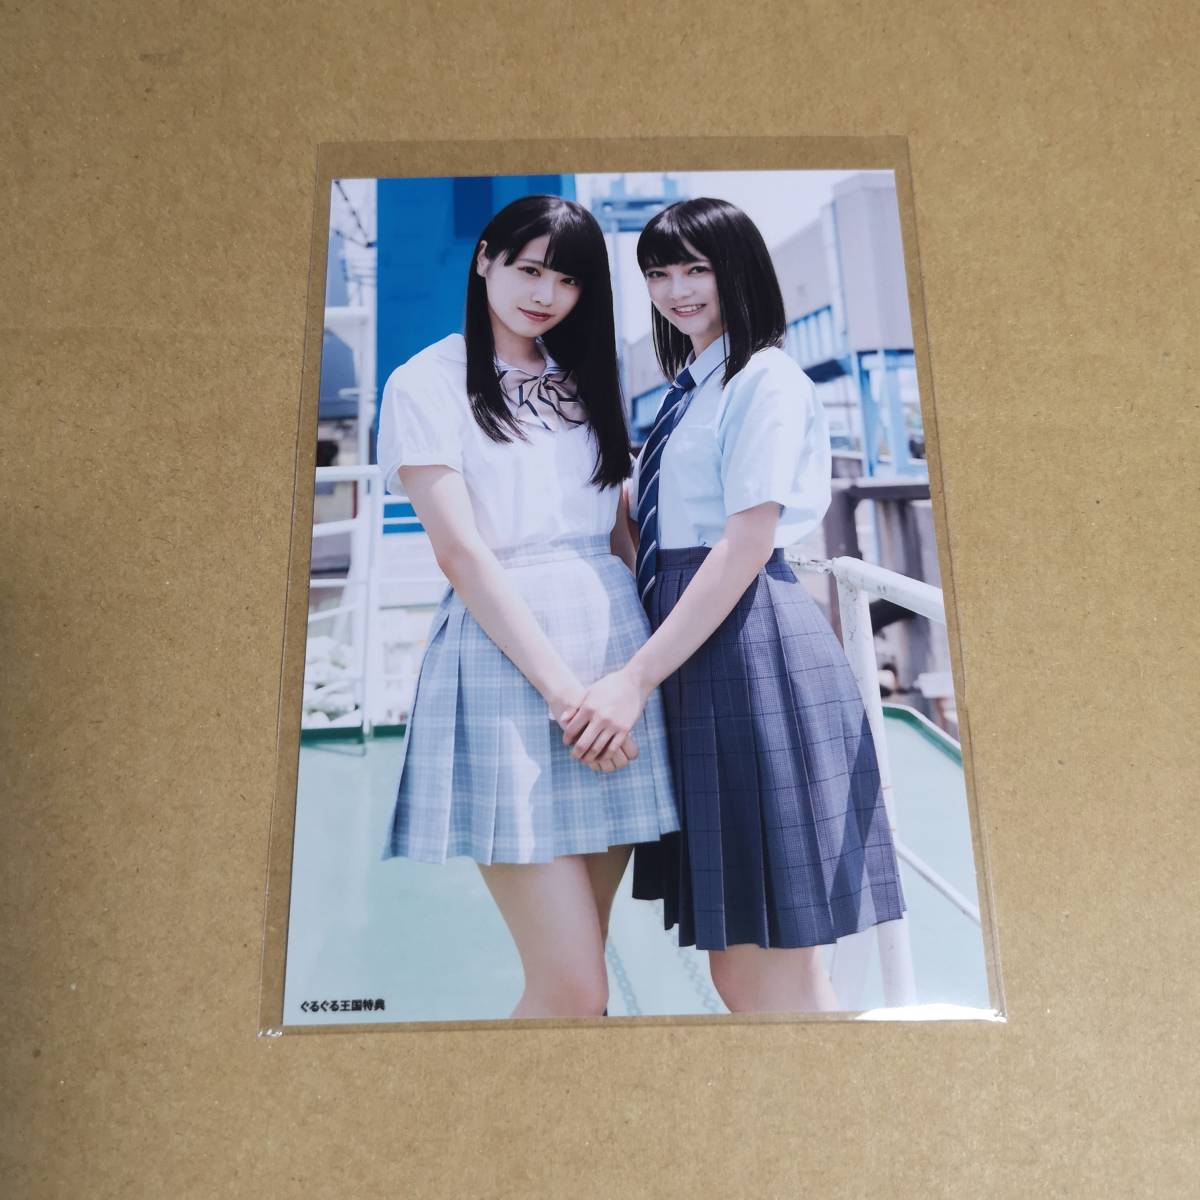 STU48 large liking . person store privilege life photograph rice field middle Nakamura 